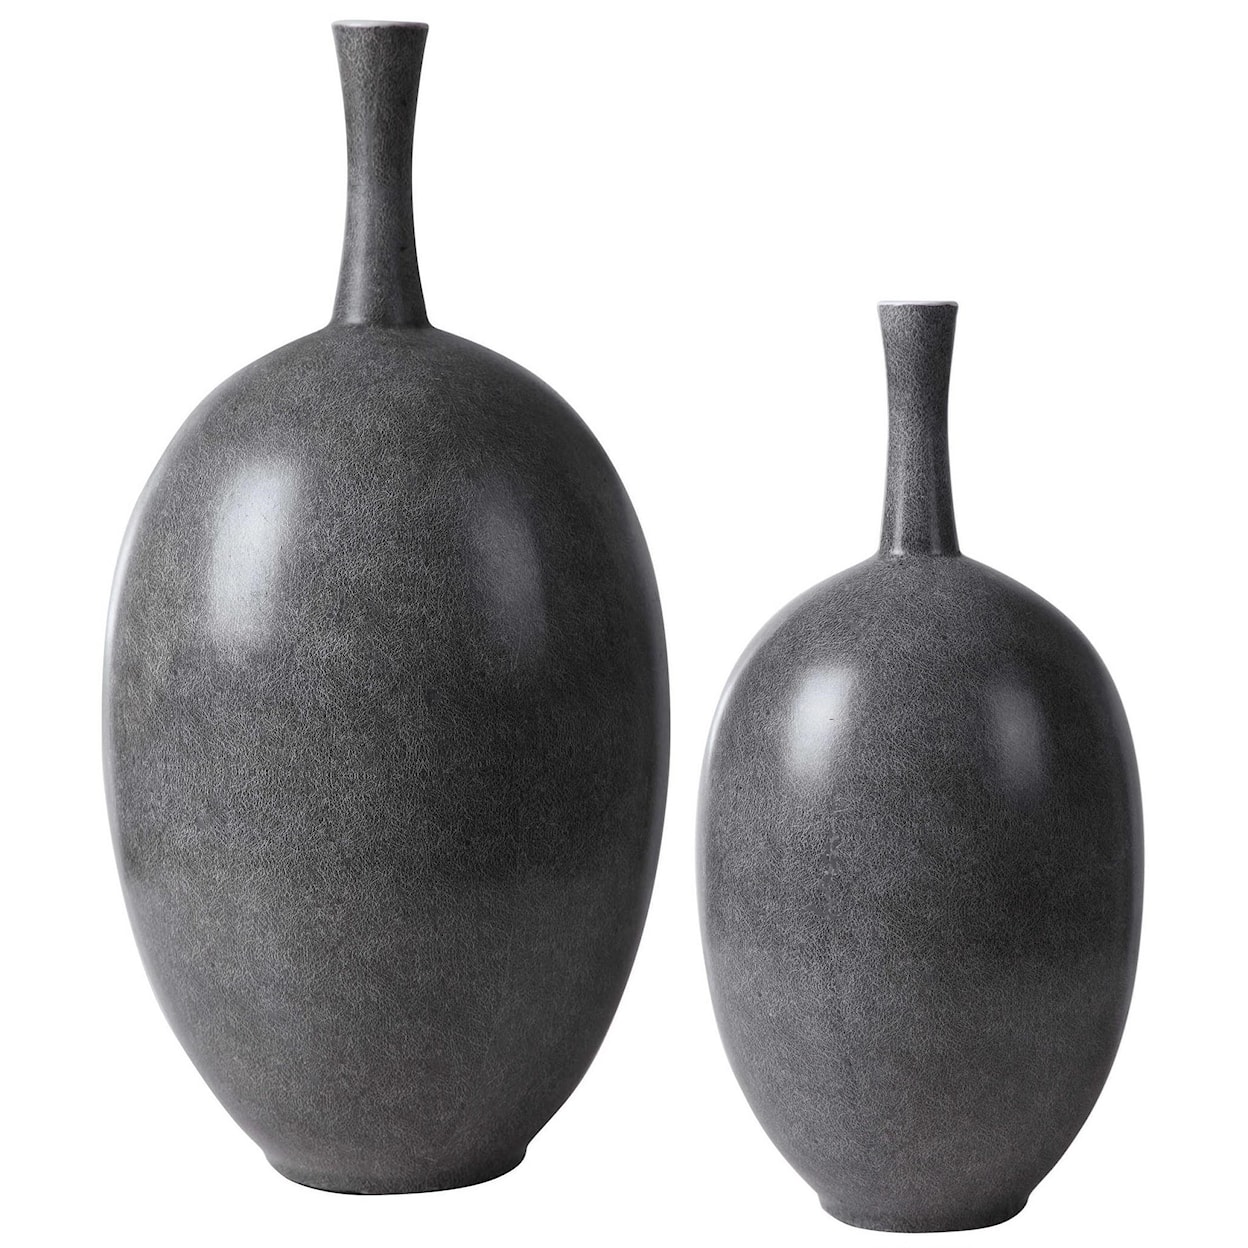 Uttermost Accessories - Vases and Urns Riordan Modern Vases, S/2